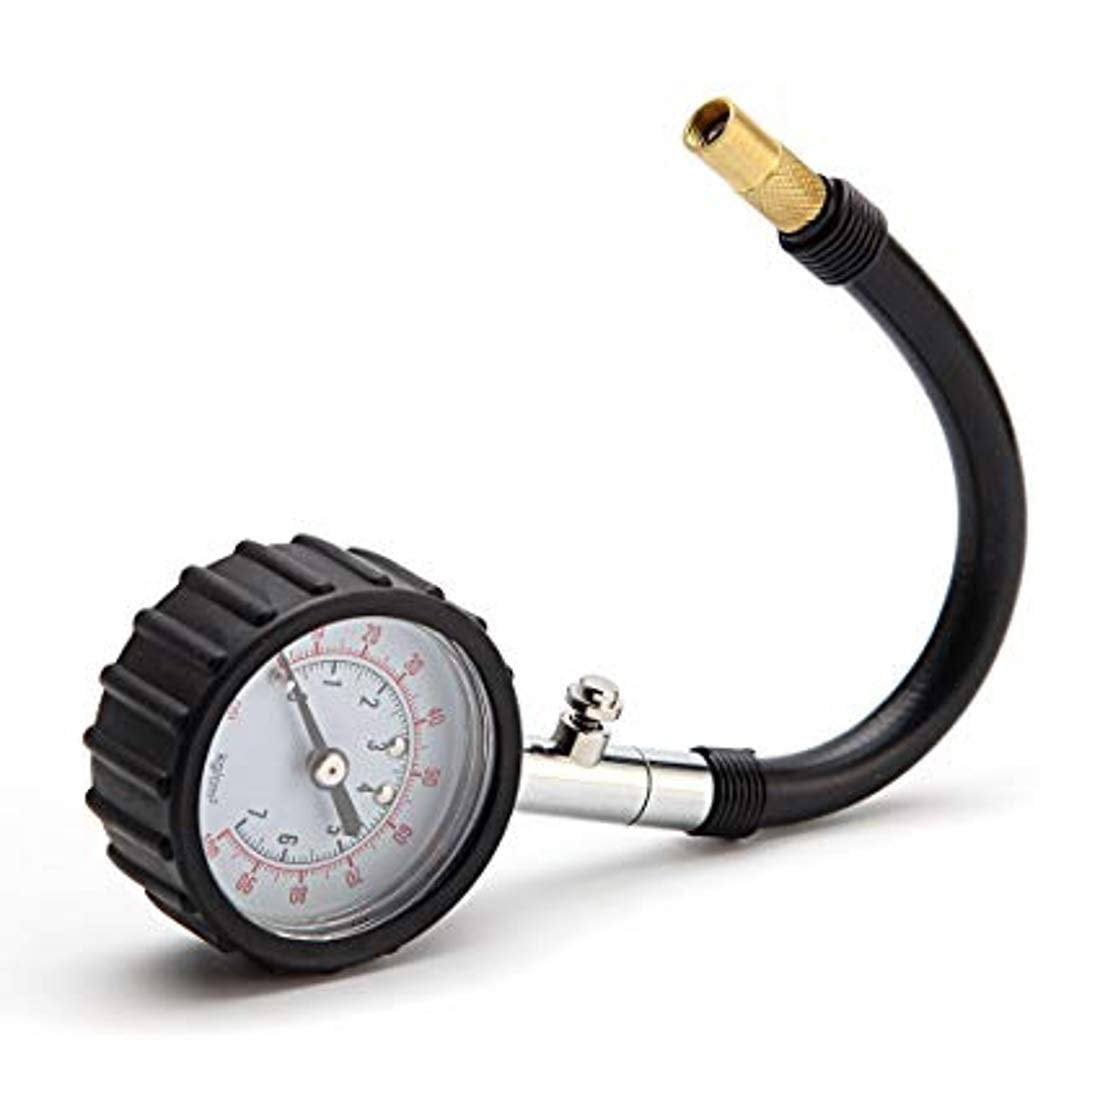 MEANLIN MEASURE 0-60Psi 2 FACE DIAL Car and Truck tire Pressure Gauge，High-Precision tire Pressure Gauge